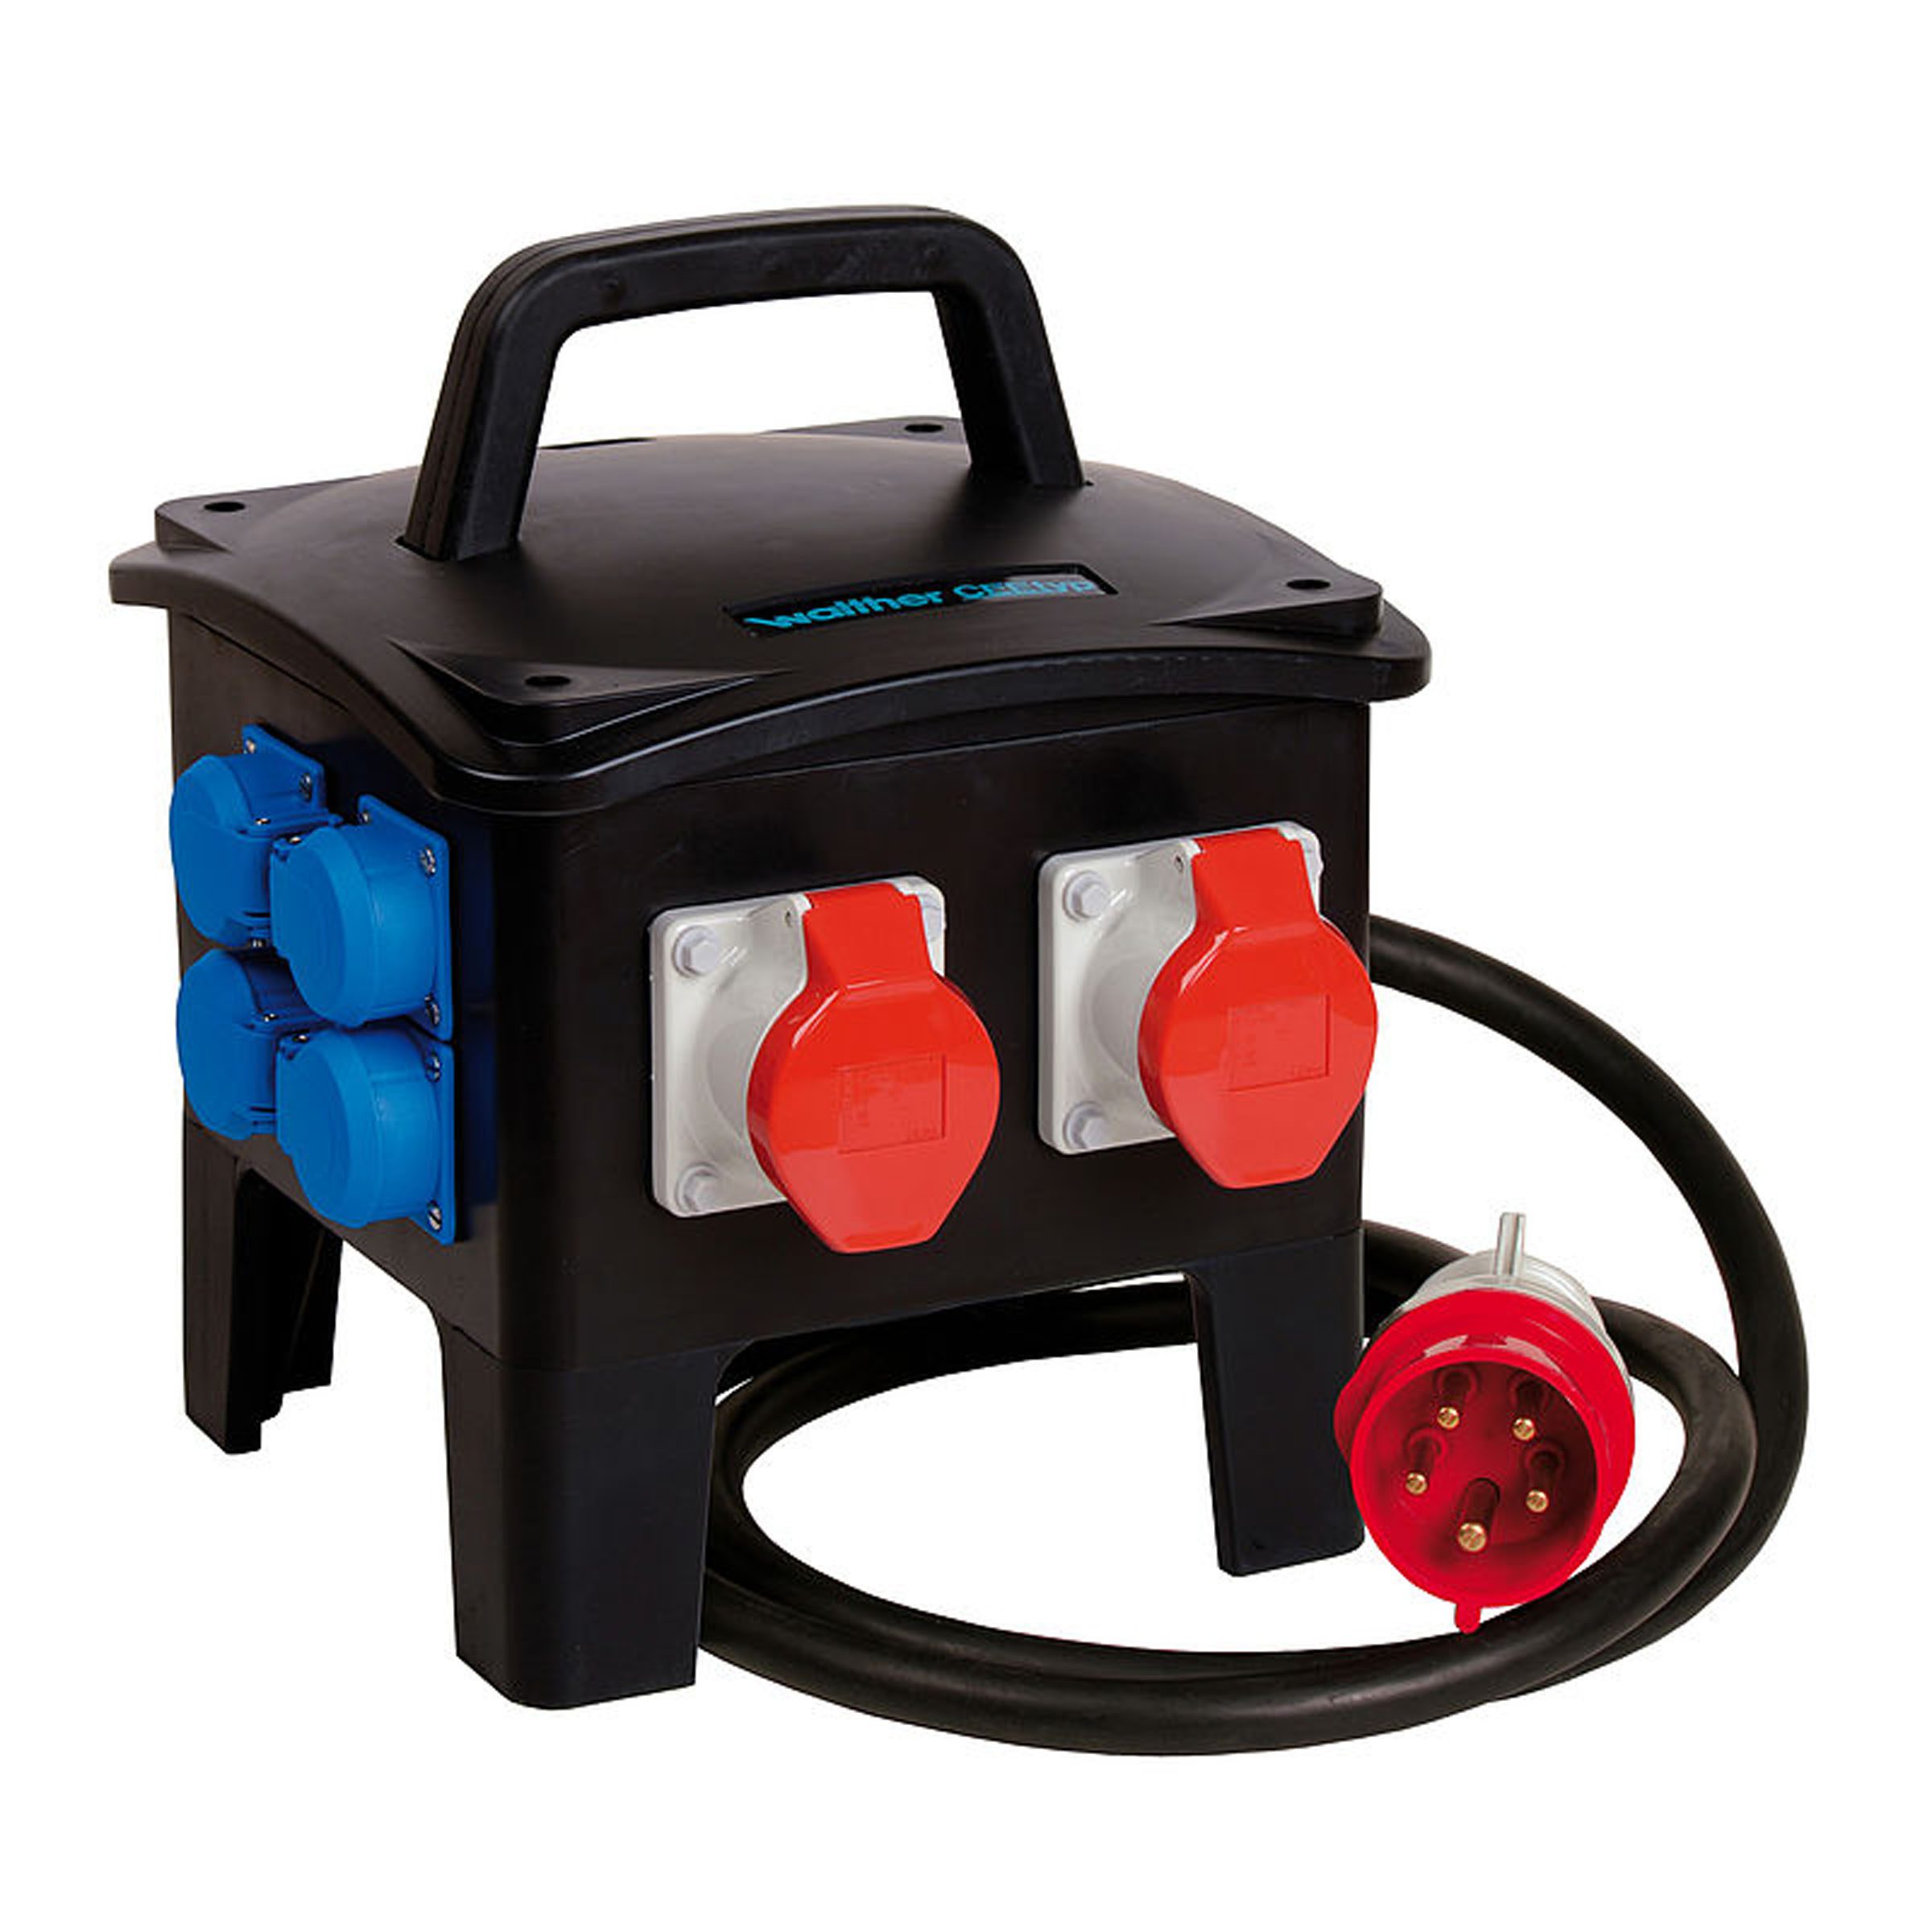 A photo of a solid rubber portable unit with an electrical outlet and power cord, suitable for various applications.